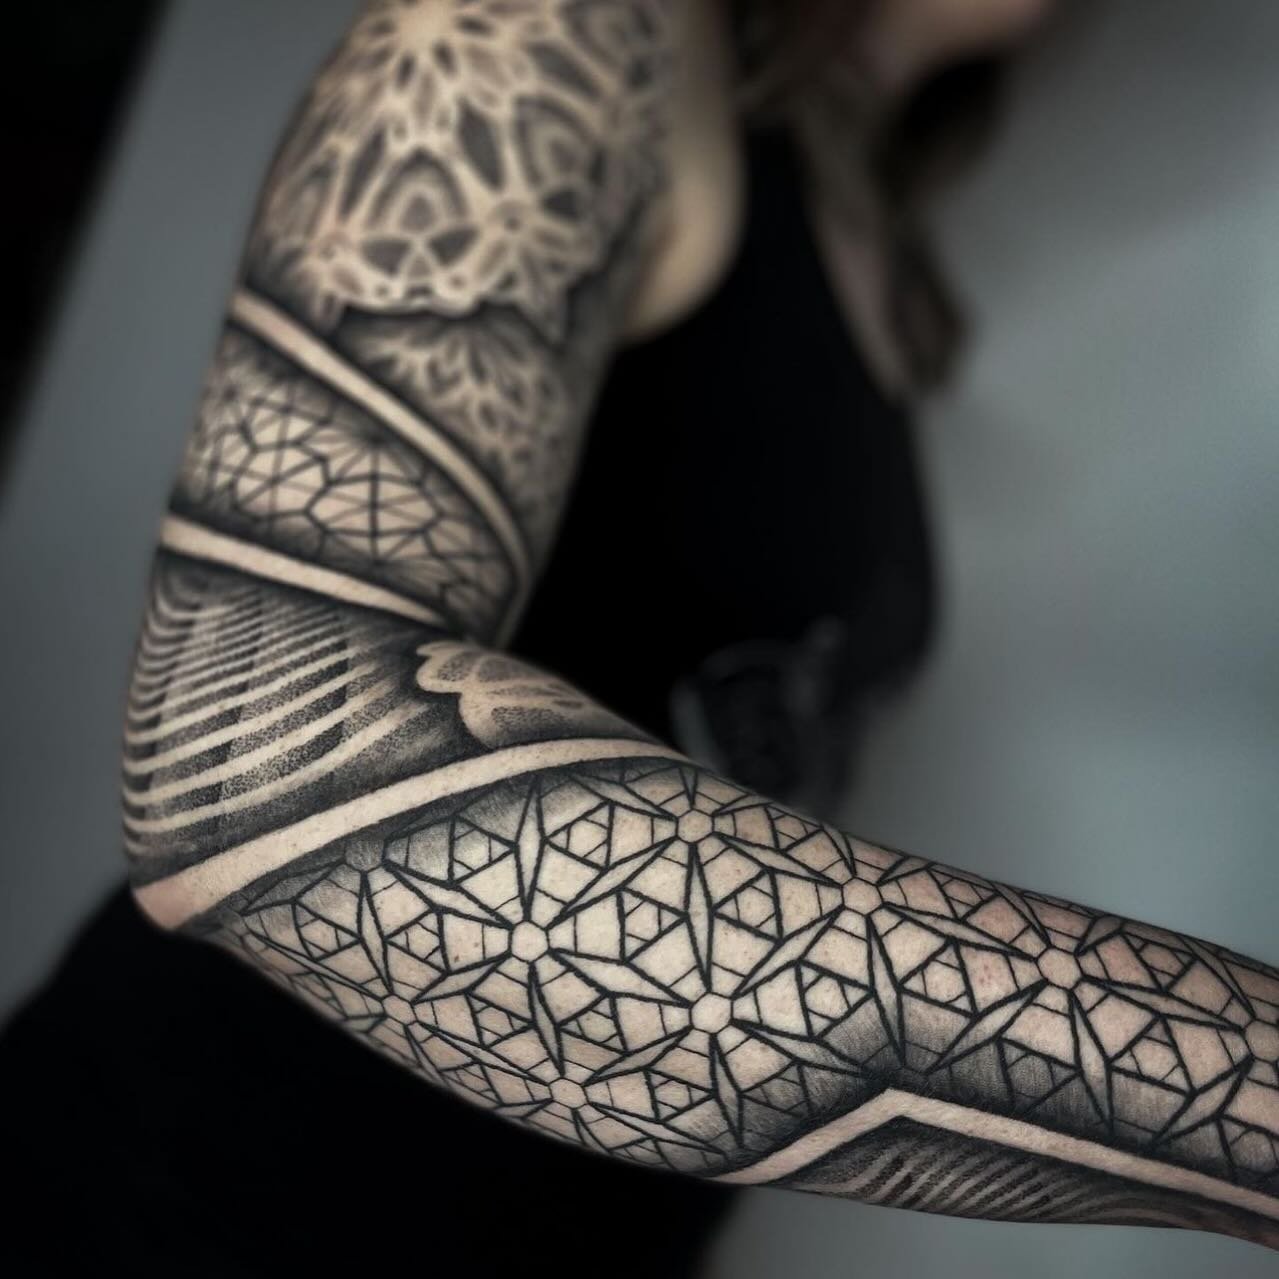 Great pattern executed perfectly by @jertattoos